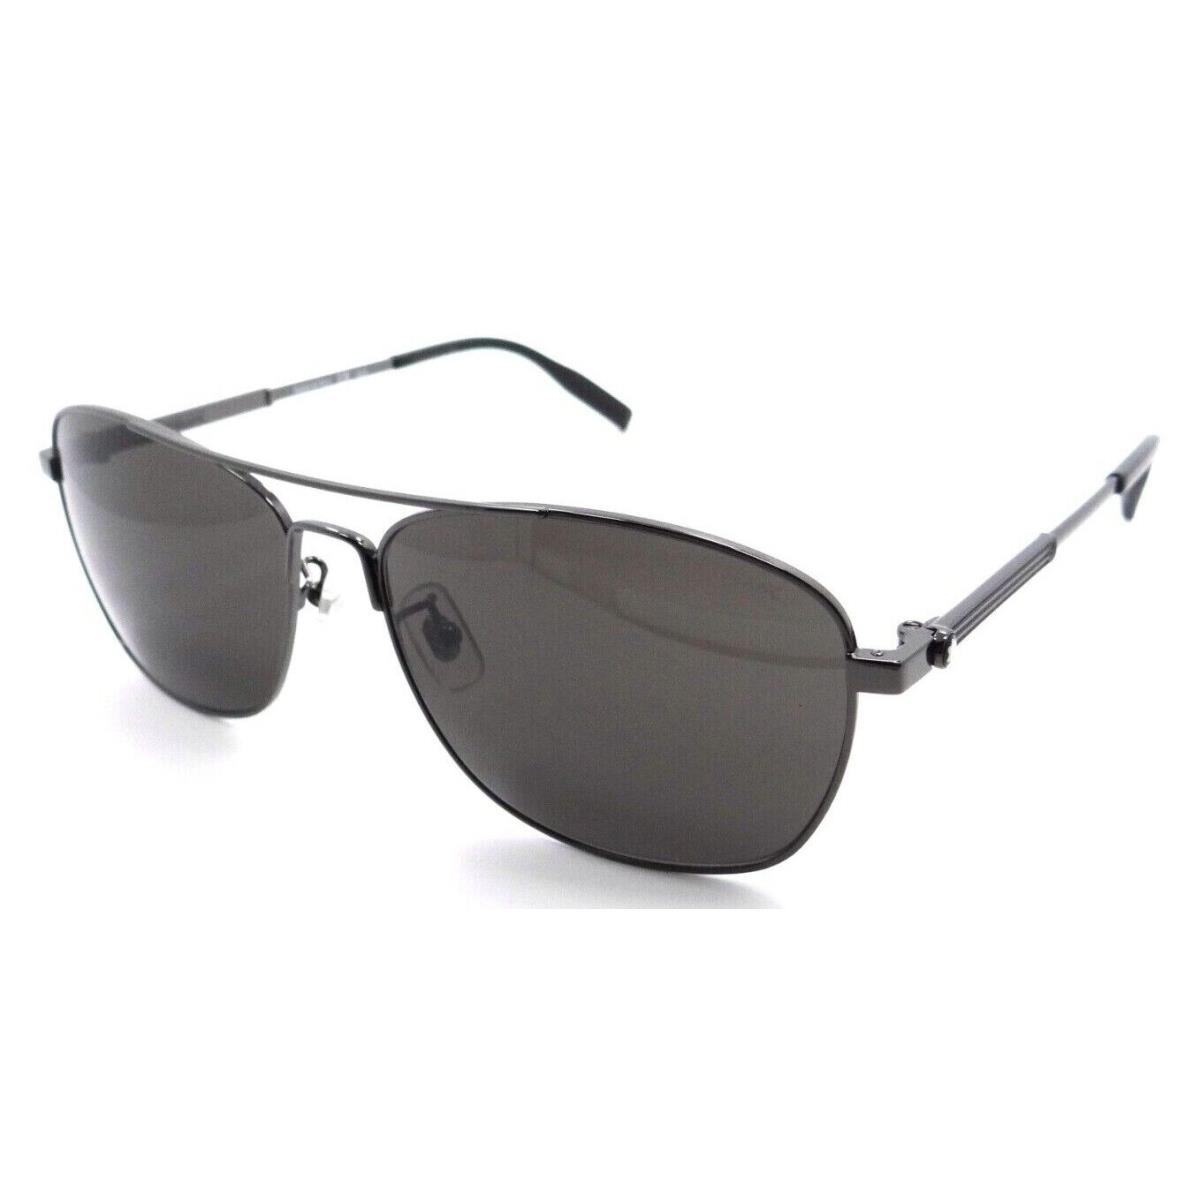 Montblanc Sunglasses MB0026S 006 61-16-150 Ruthenium / Grey Made in Italy